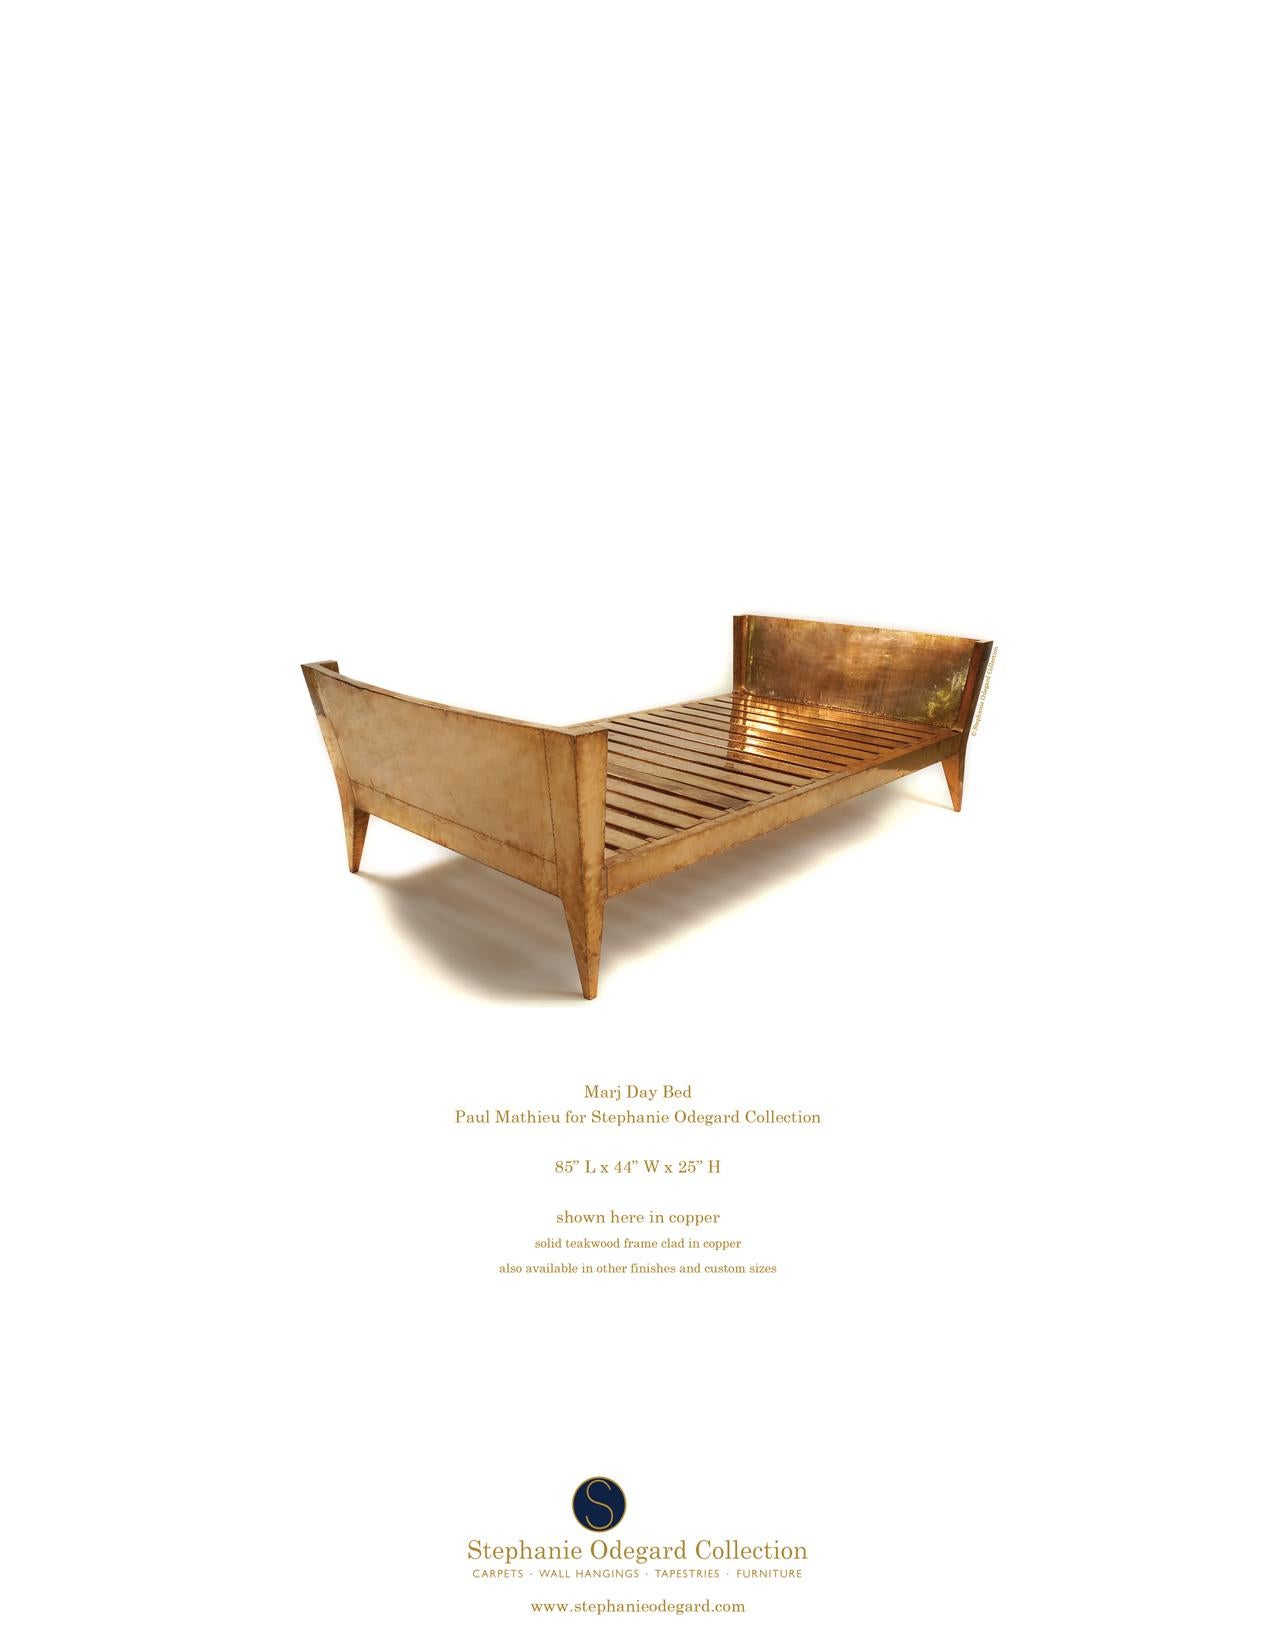 American Marj Day Bed in Copper Clad Over Teakwood by Paul Mathieu for Stephanie Odegard For Sale